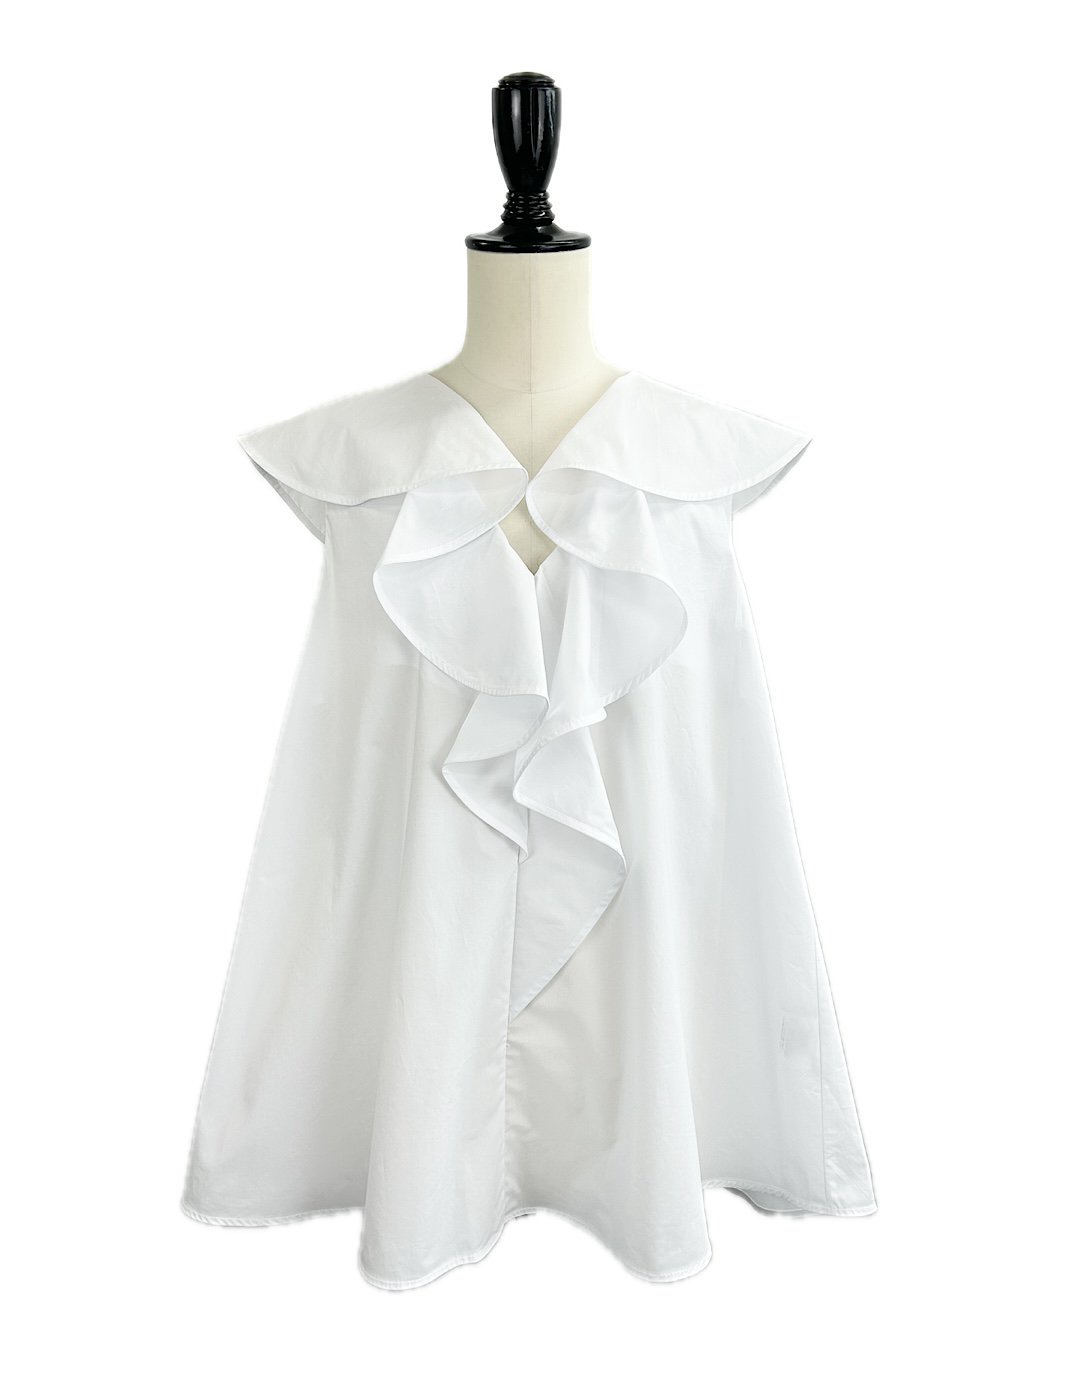 <img class='new_mark_img1' src='https://img.shop-pro.jp/img/new/icons6.gif' style='border:none;display:inline;margin:0px;padding:0px;width:auto;' />30offMEIMEIJ / FRILL COLLAR BLOUSE